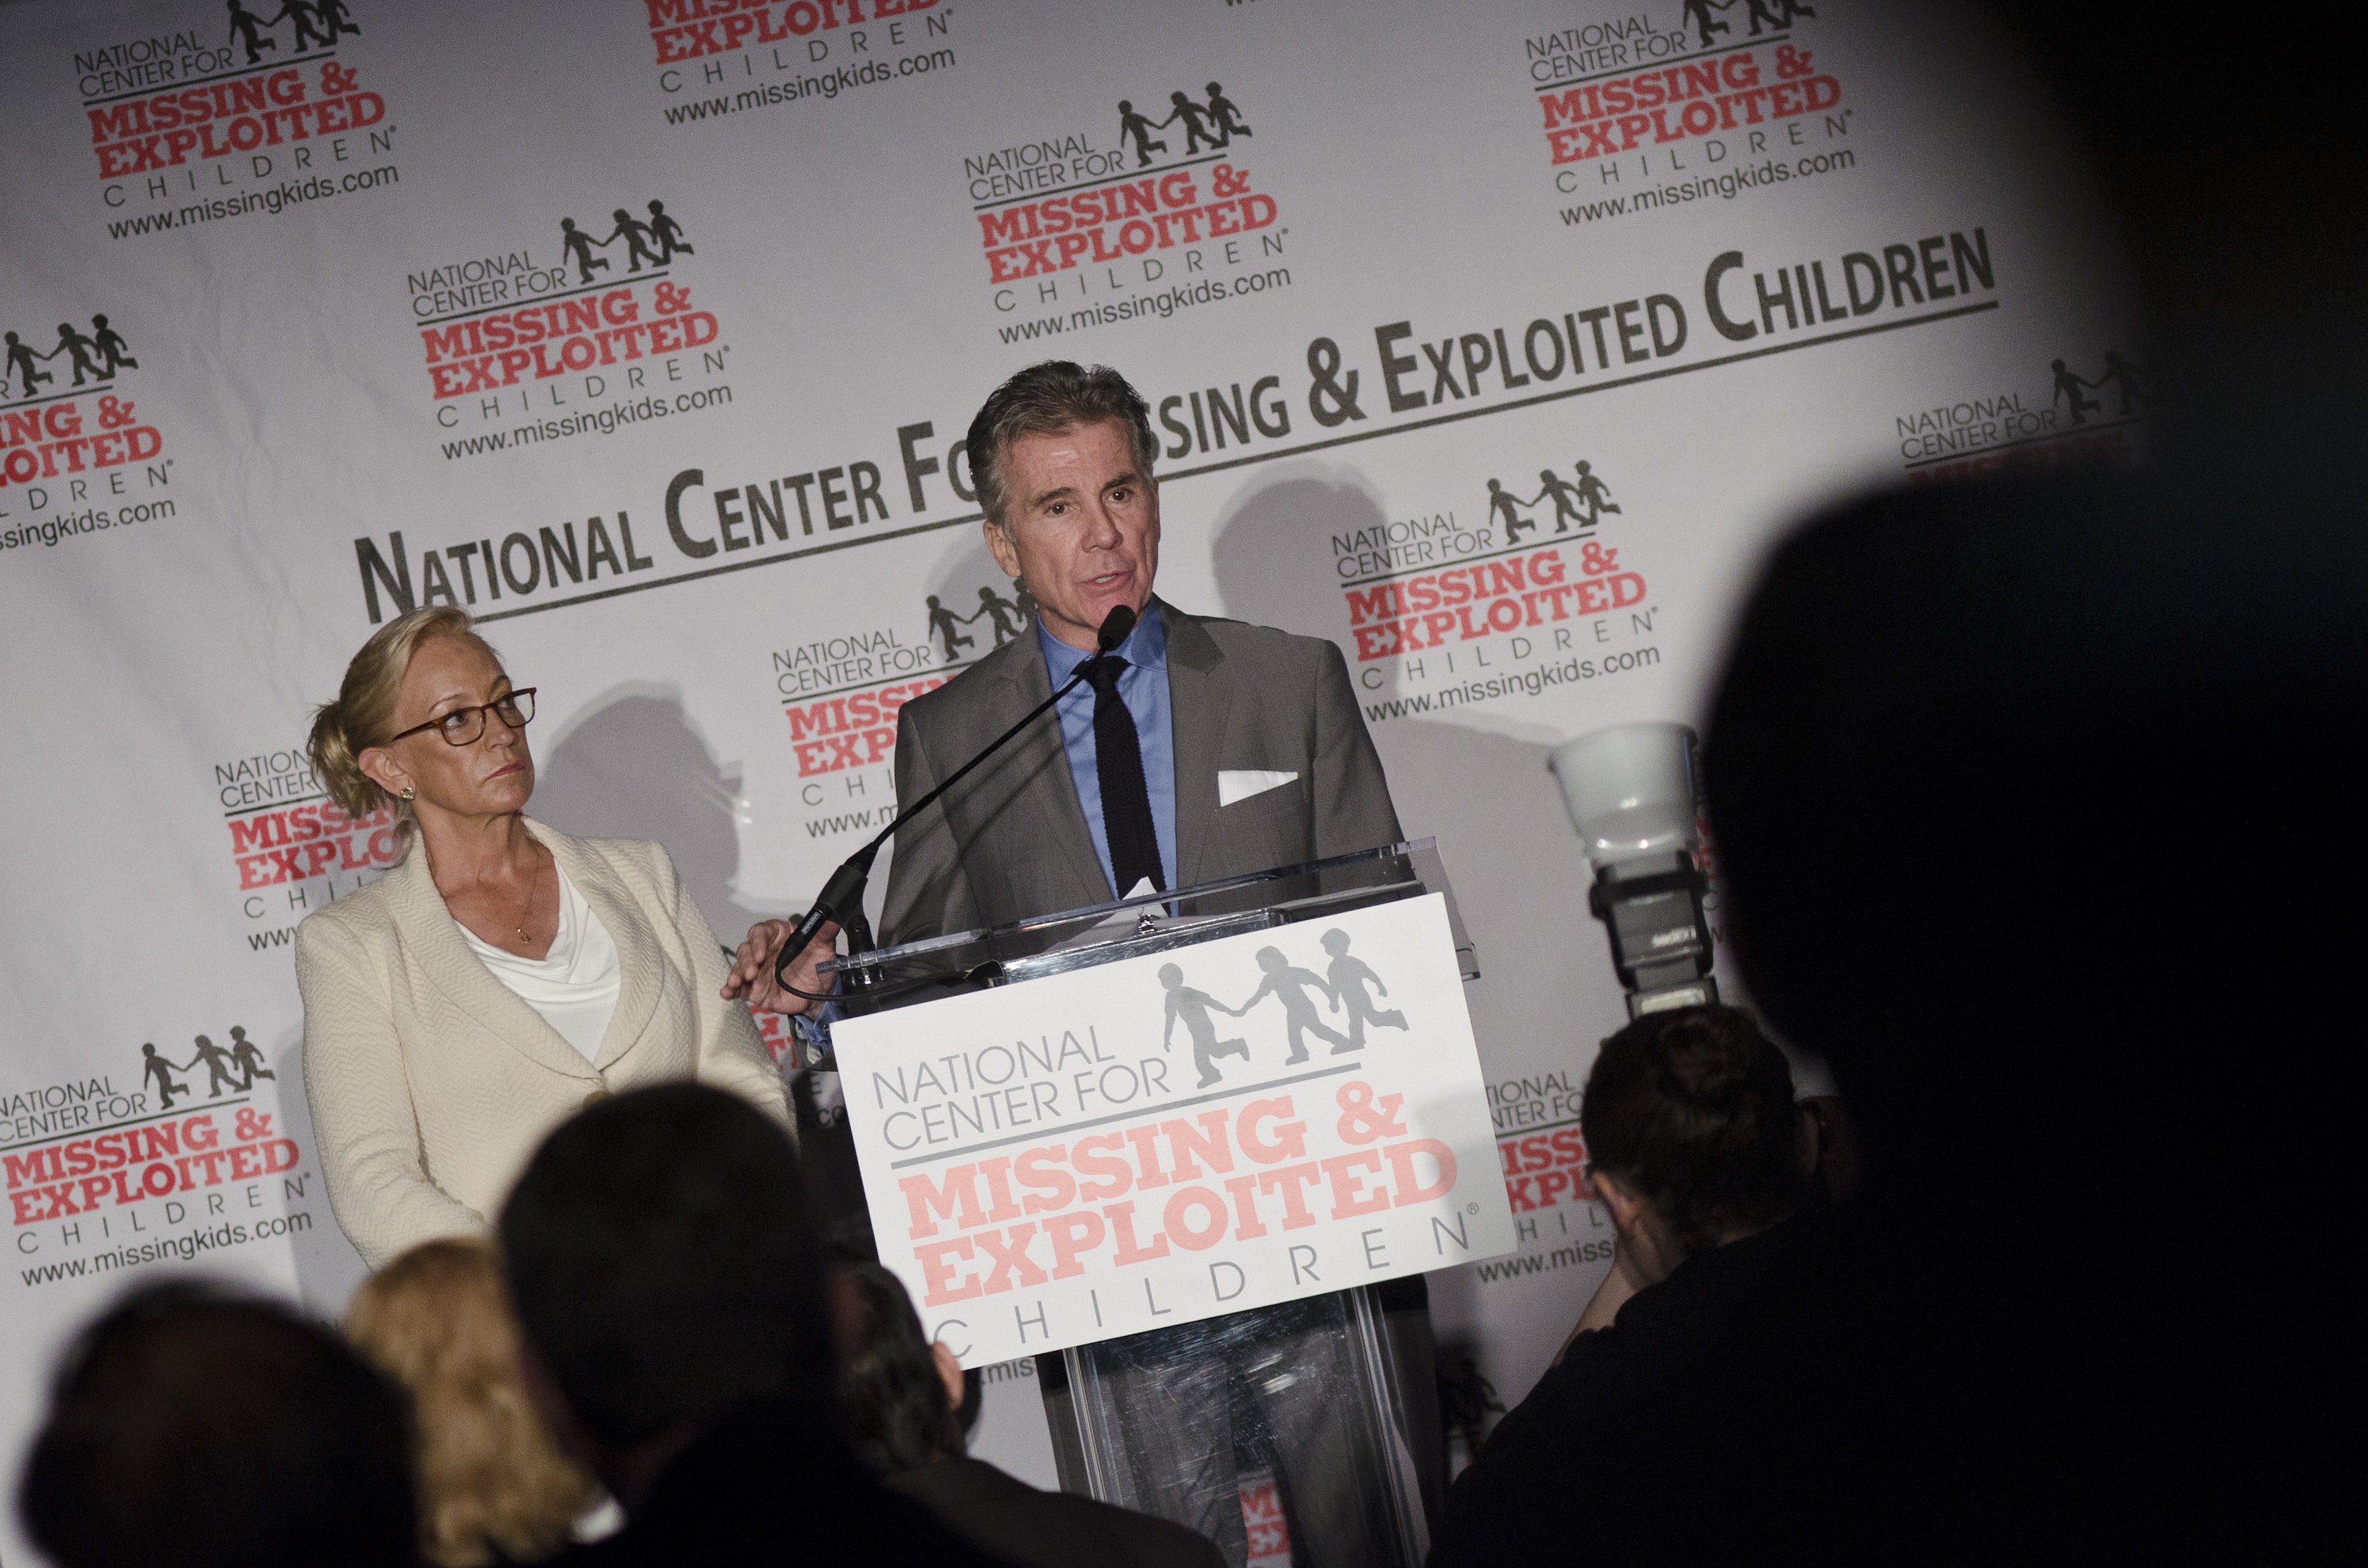 Reve Walsh and John Walsh speak during The National Center For Missing And Exploited Children, the Fraternal Order of the Police and the Justice Departments's 16th Annual Congressional Breakfast, at The Liaison Capitol Hill Hotel, on May 18, 2011, in Washington, DC. | Source: Getty Images